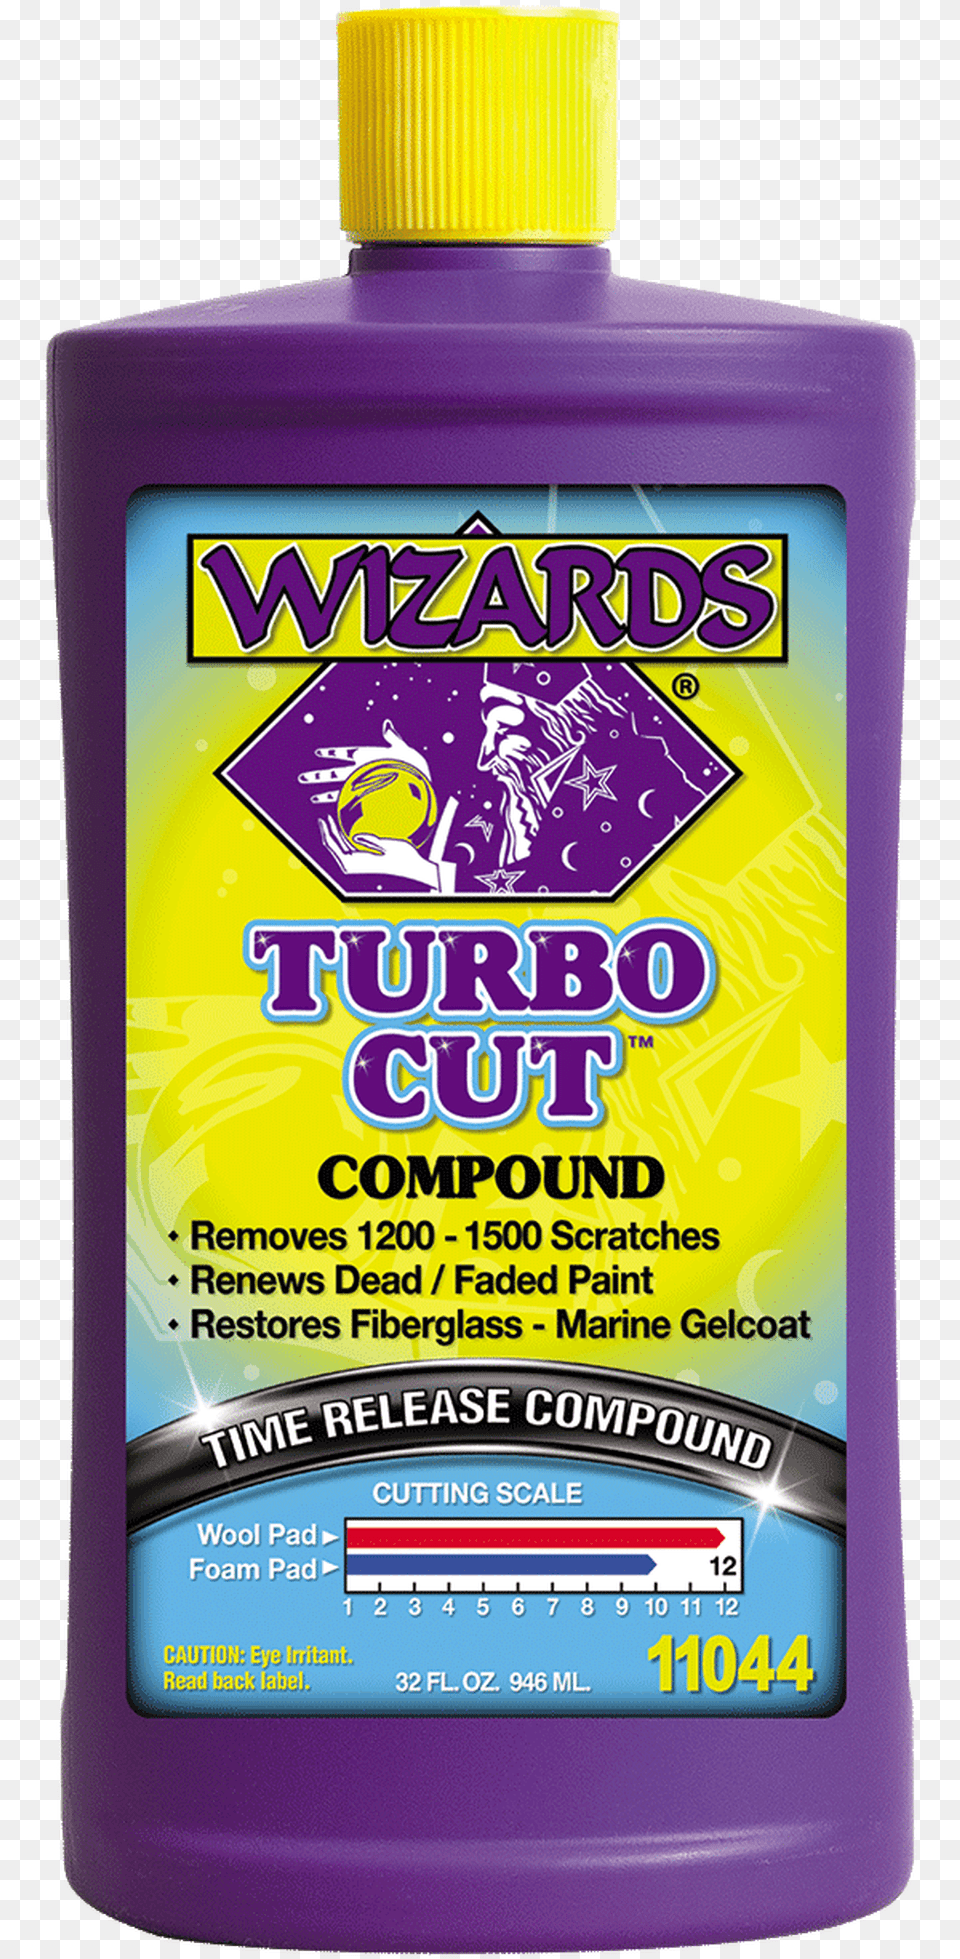 Wizards Turbo Cut Time Release Compound 32 Oz Bottle, Purple, Herbal, Herbs, Plant Free Transparent Png